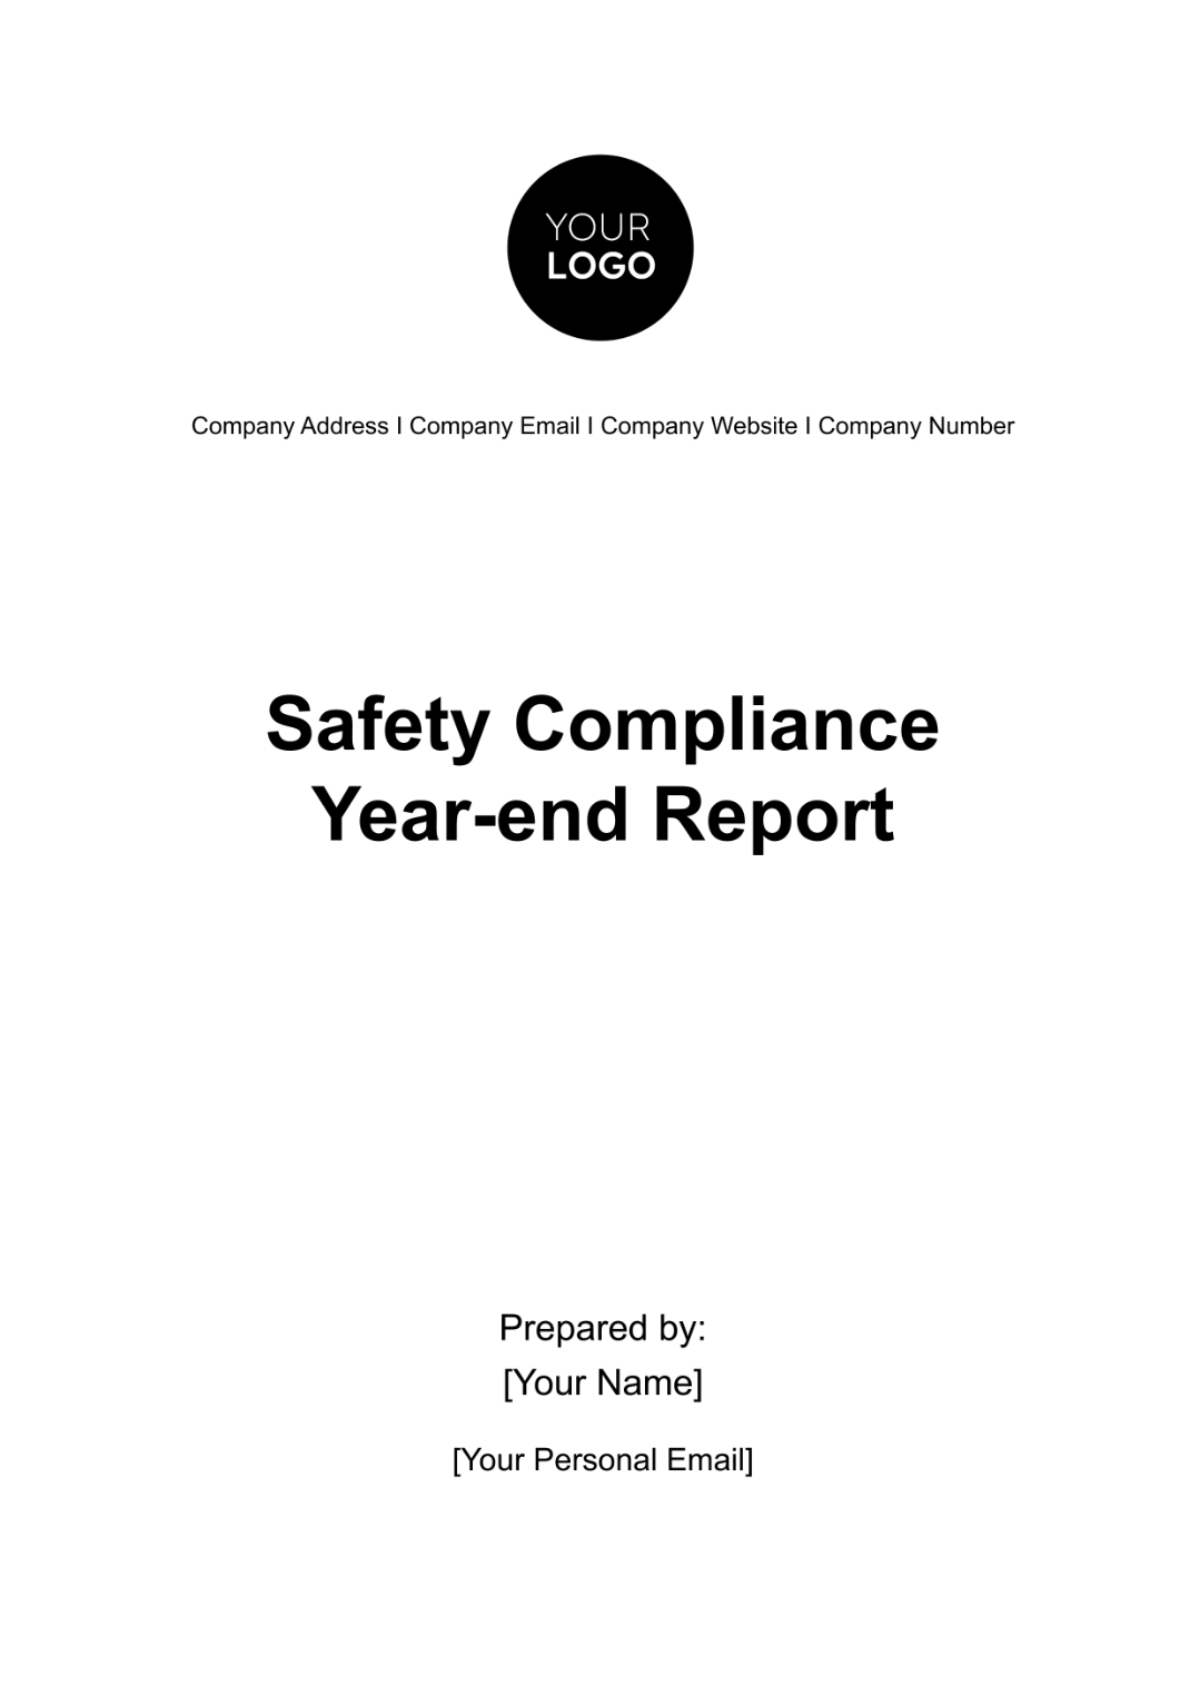 Free Safety Compliance Year-end Report HR Template